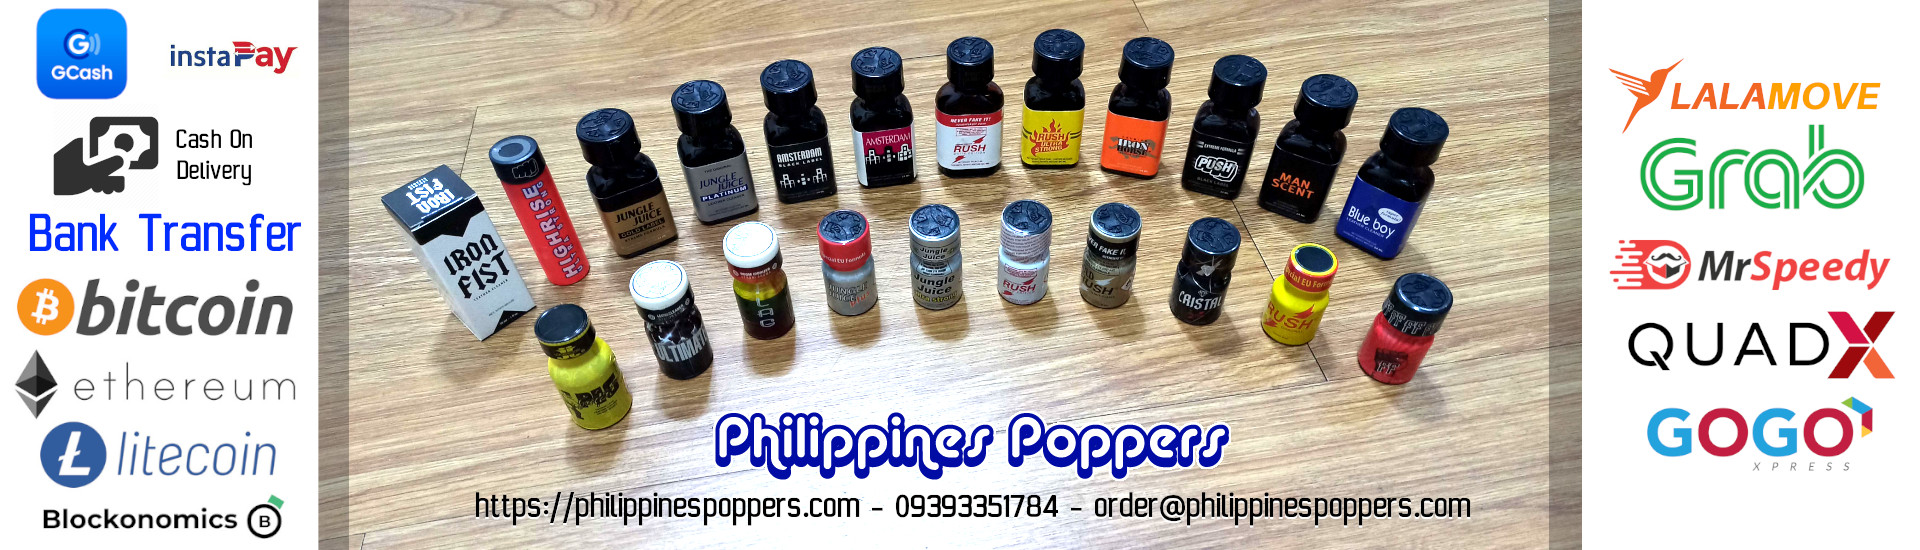 Poppers for sale in the Philippines